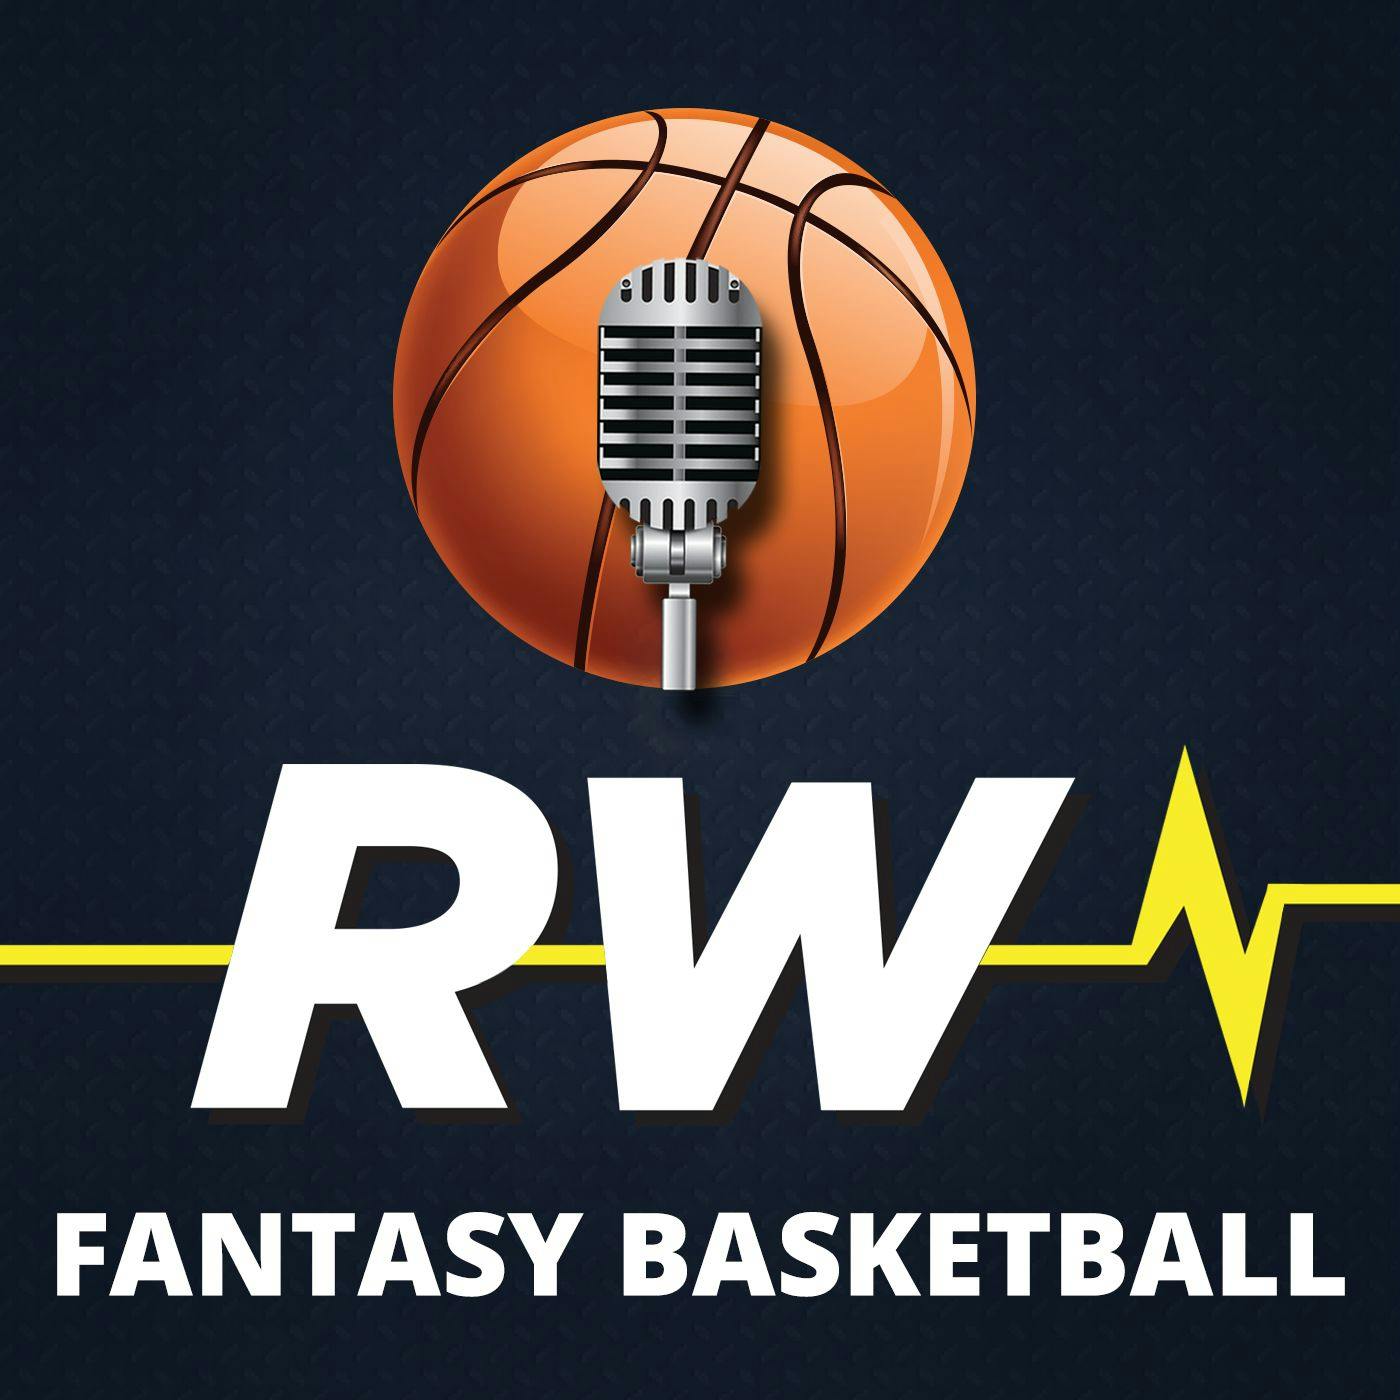 Denver On The Ropes, Knicks Grind Out Another Win + Picks and Plays for Thursday's Slate